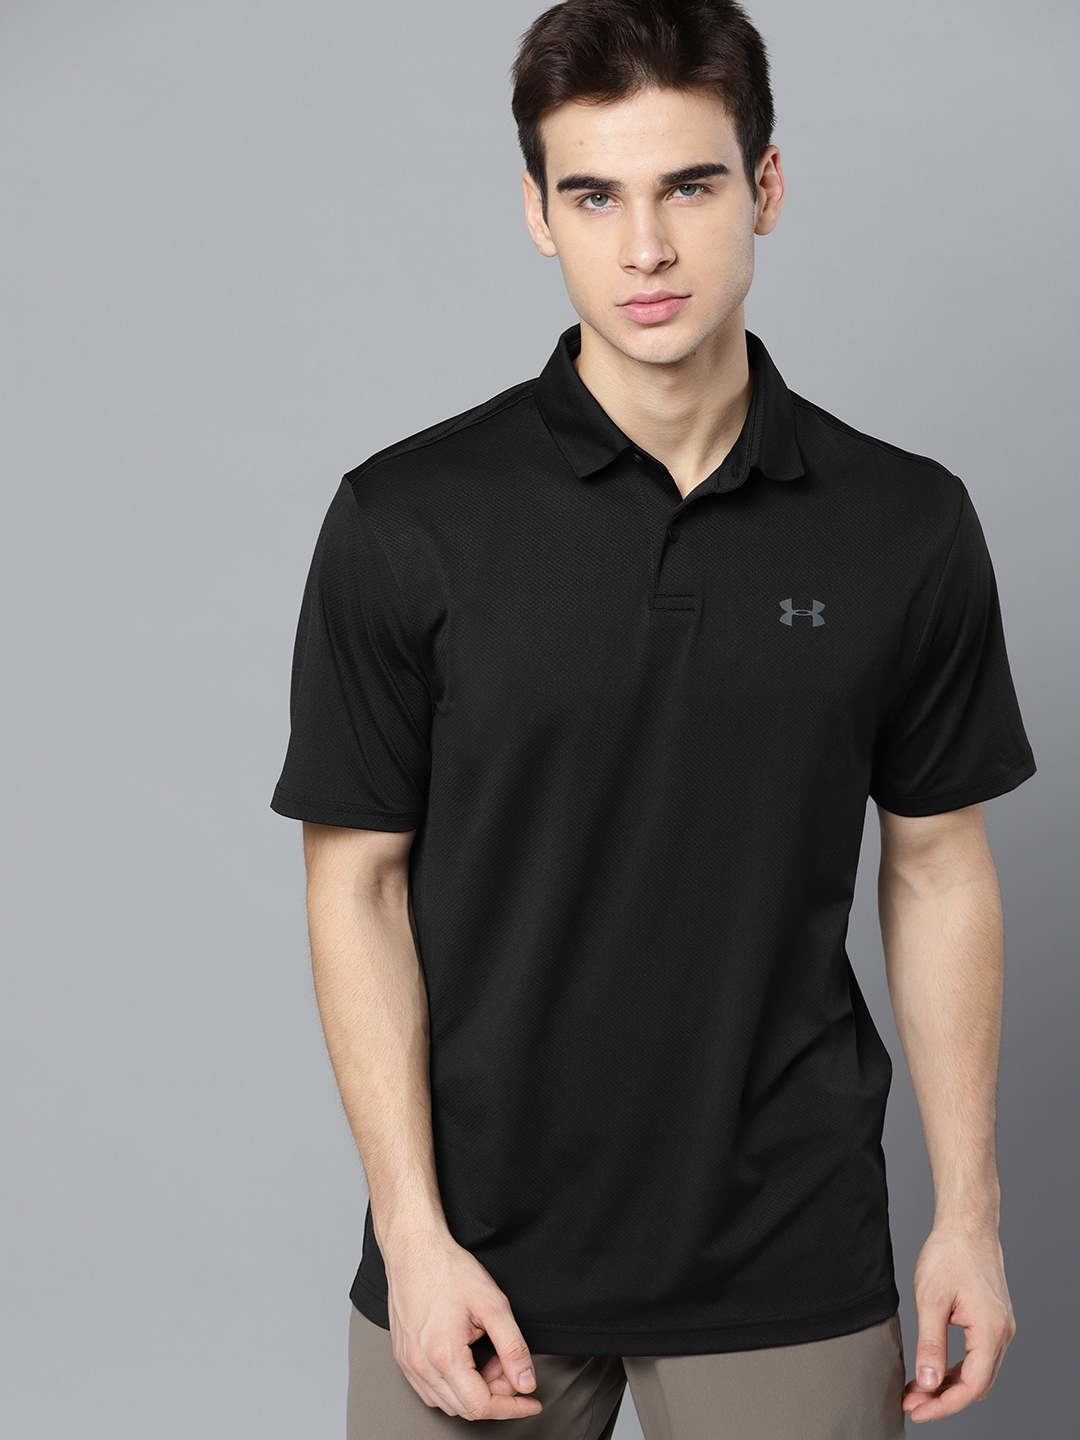 Buy UNDER ARMOUR Black Solid Performance 2.0 Polo Collar T Shirt - Tshirts for Men 8901913 | Myntra